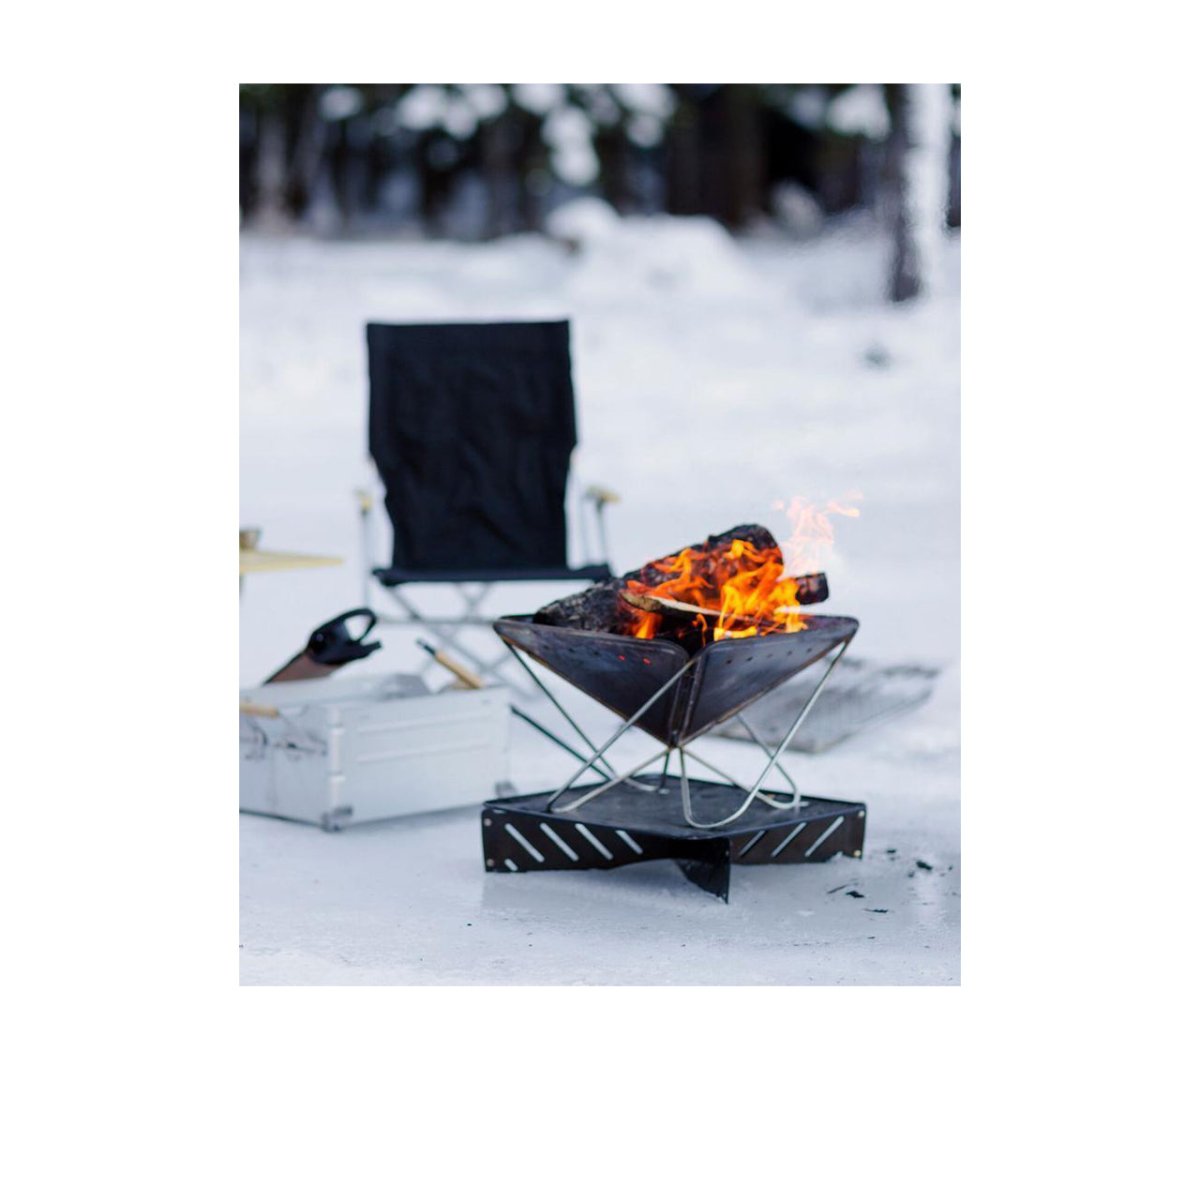 Snow Peak Pack & Carry Fireplace L (Silver)  - Allike Store